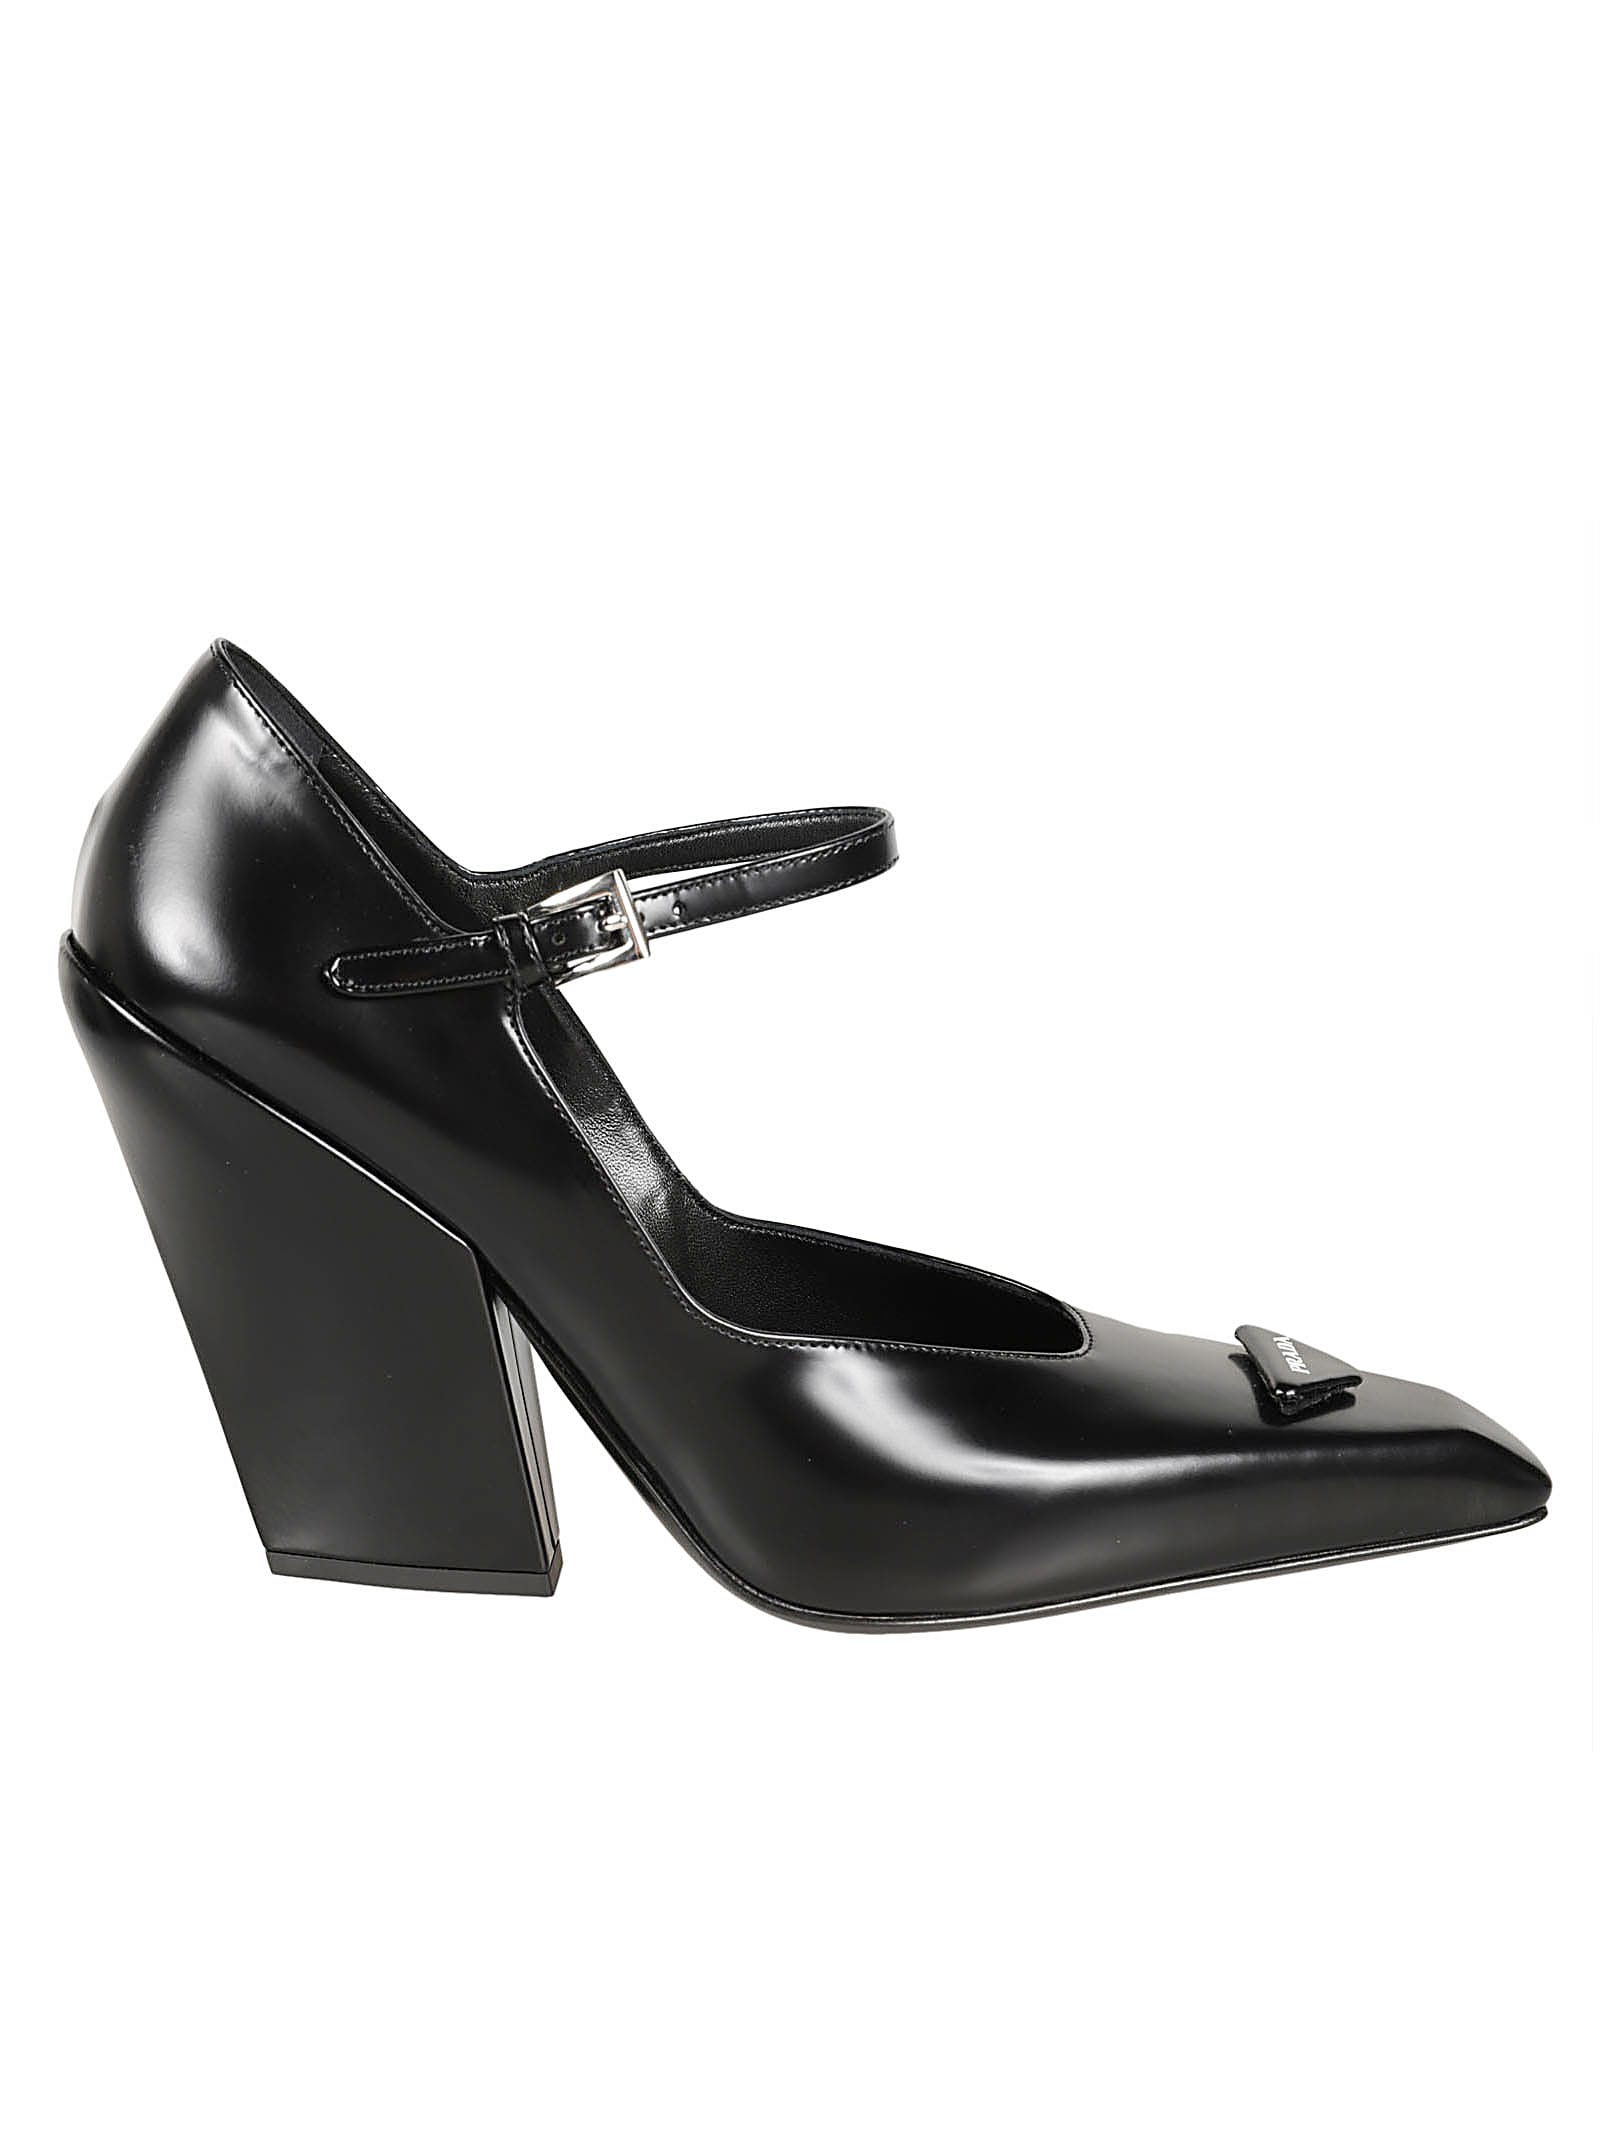 Prada Ankle Strapped Pumps